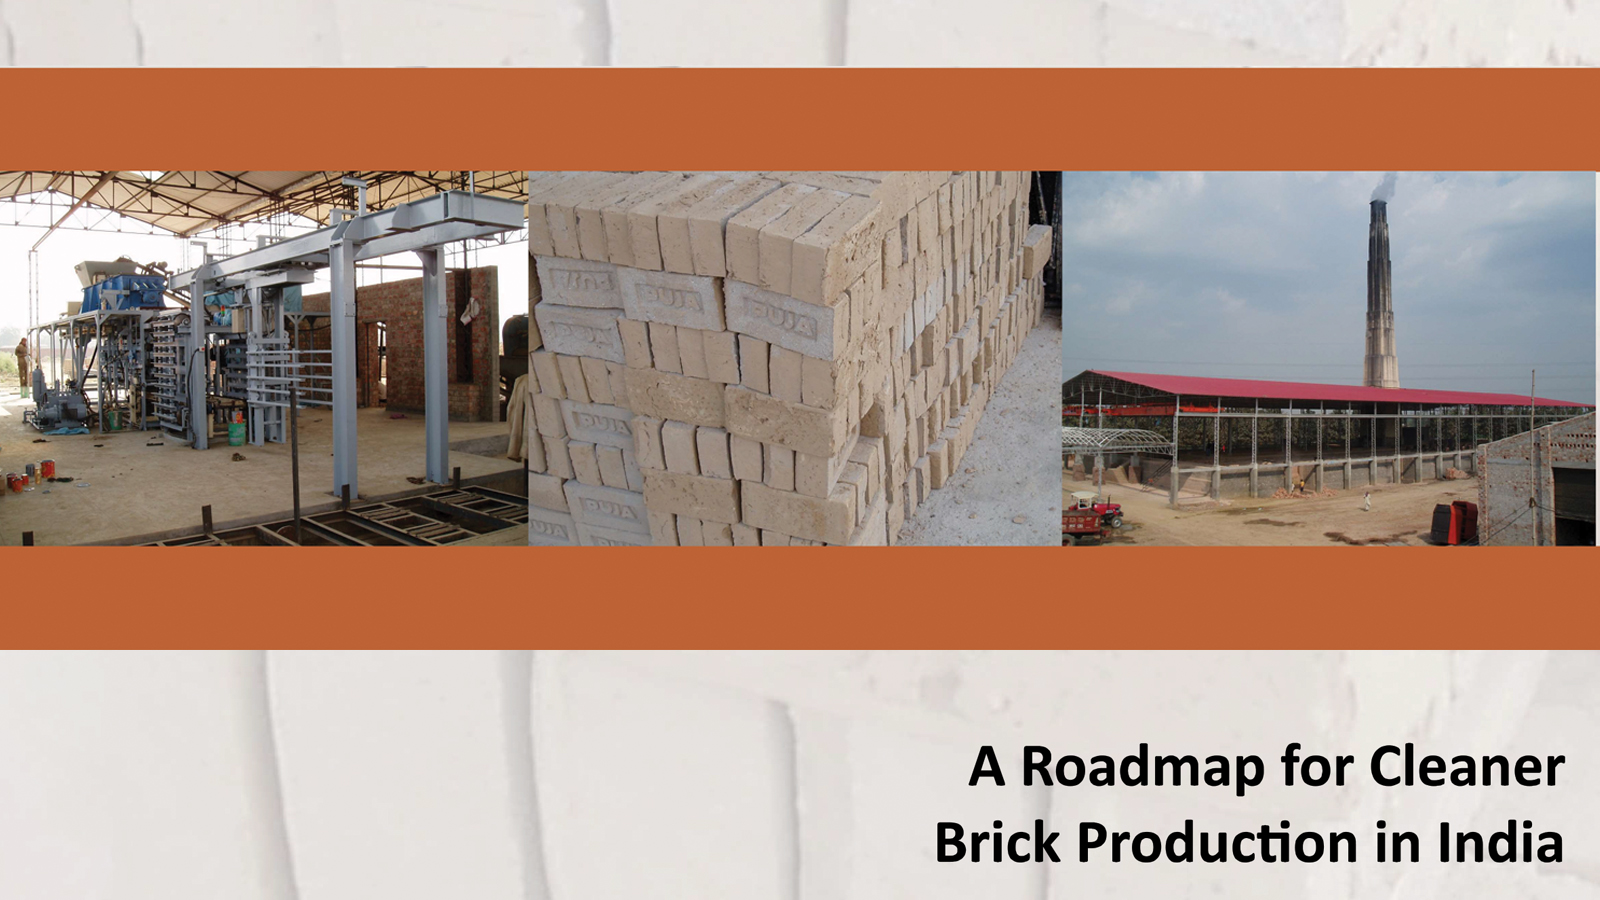 Brick Kilns Performance Assessment: A Roadmap for Cleaner Brick Production in India (2012)